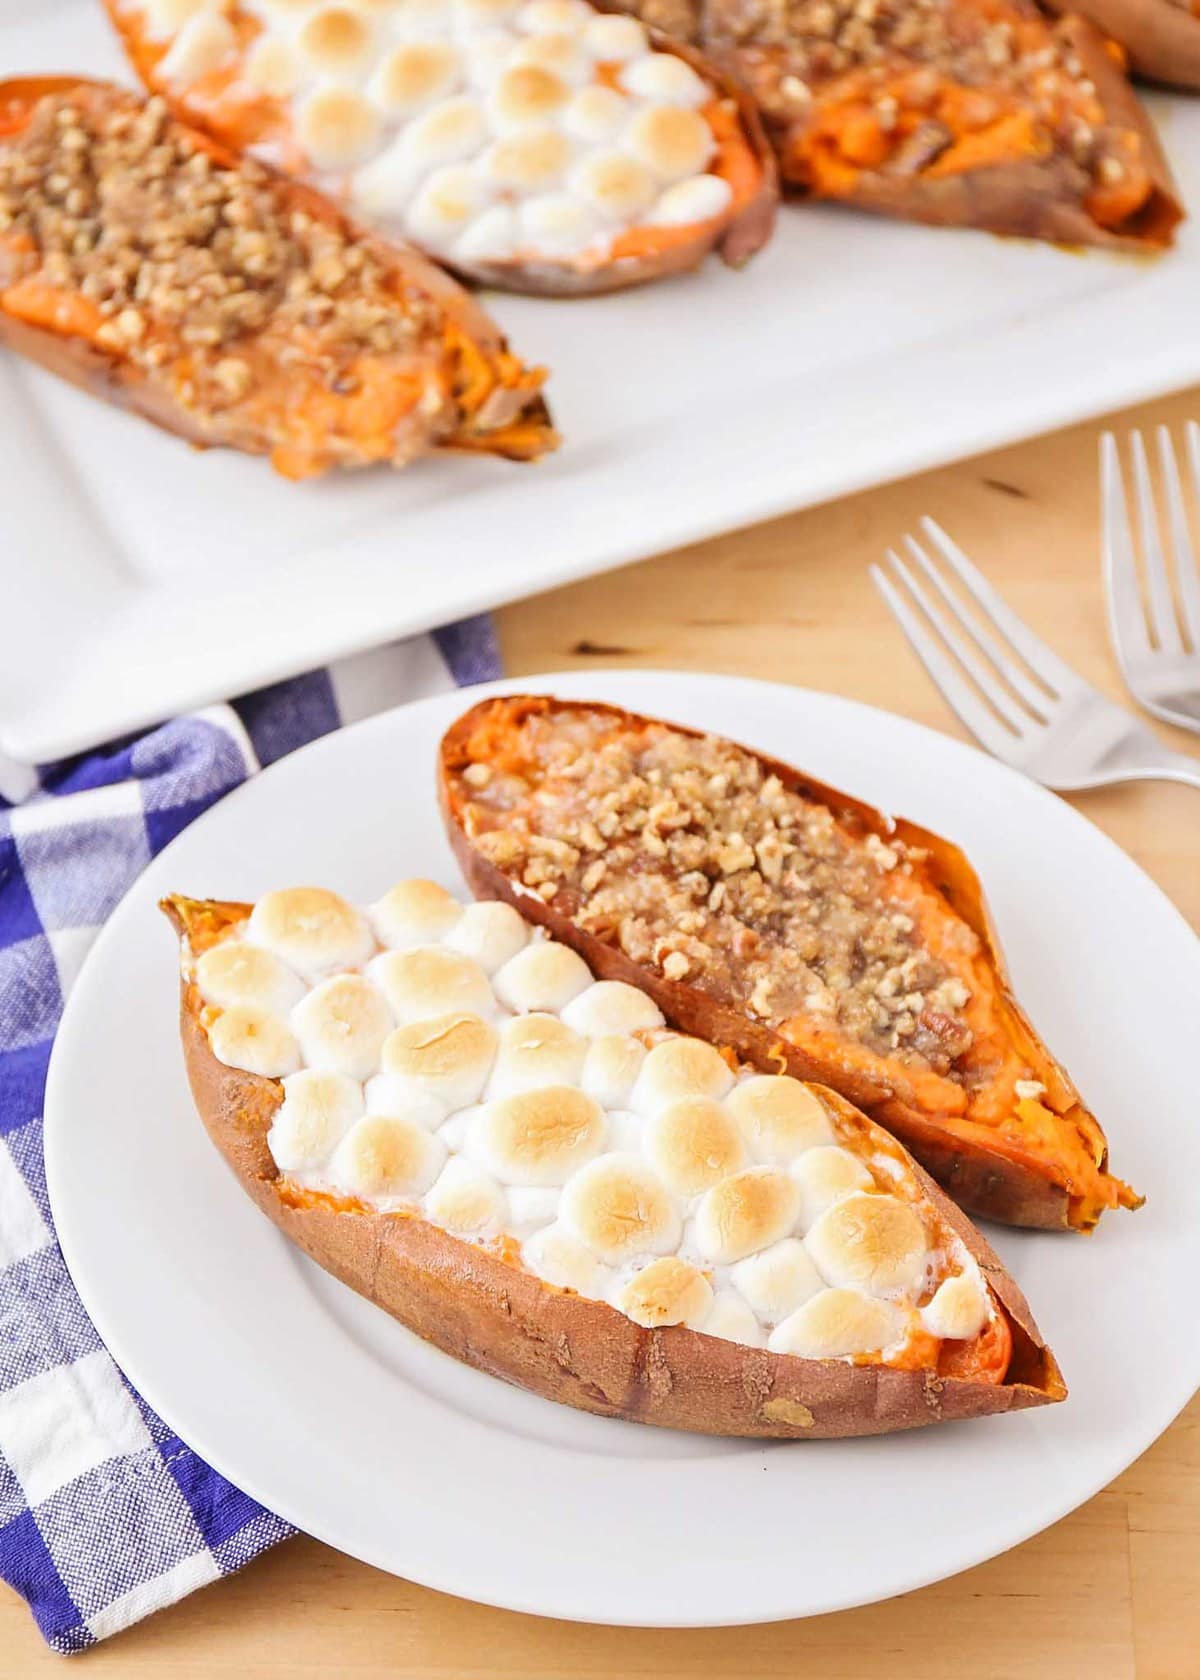 friendsgiving Recipes | easy thanksgiving side dishes | twice baked sweet potatoes